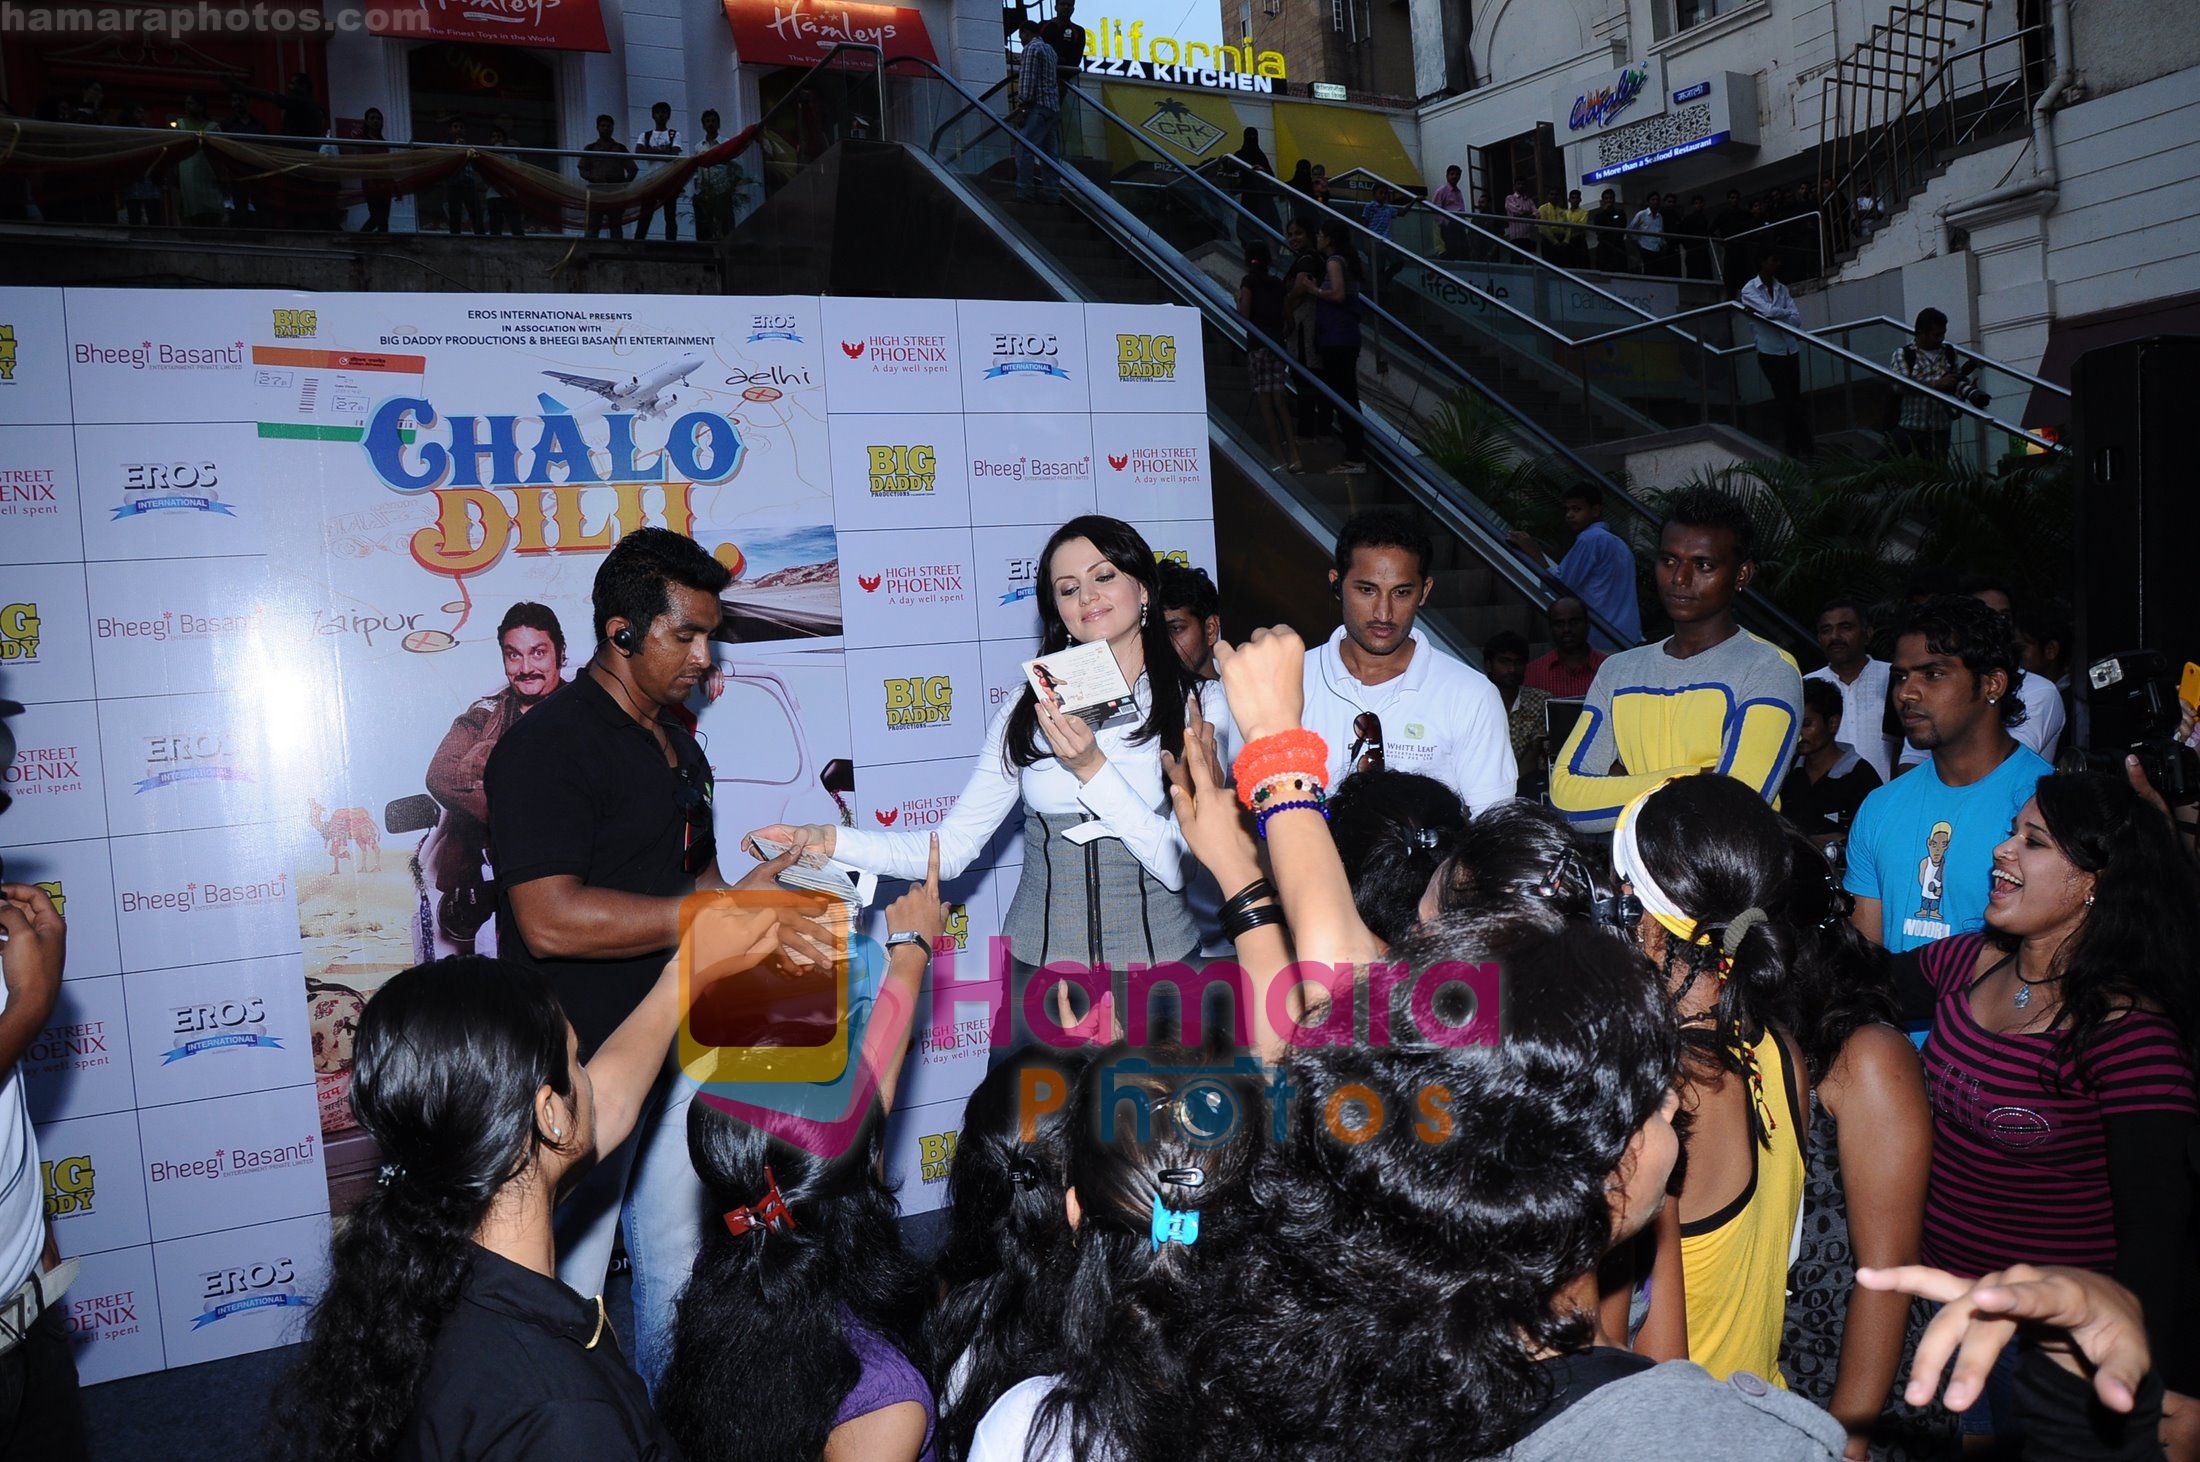 Yana Gupta Does Flash Mob activity to promote Chalo Dilli in   Phoenix Mills on 15th April 2011 ~0